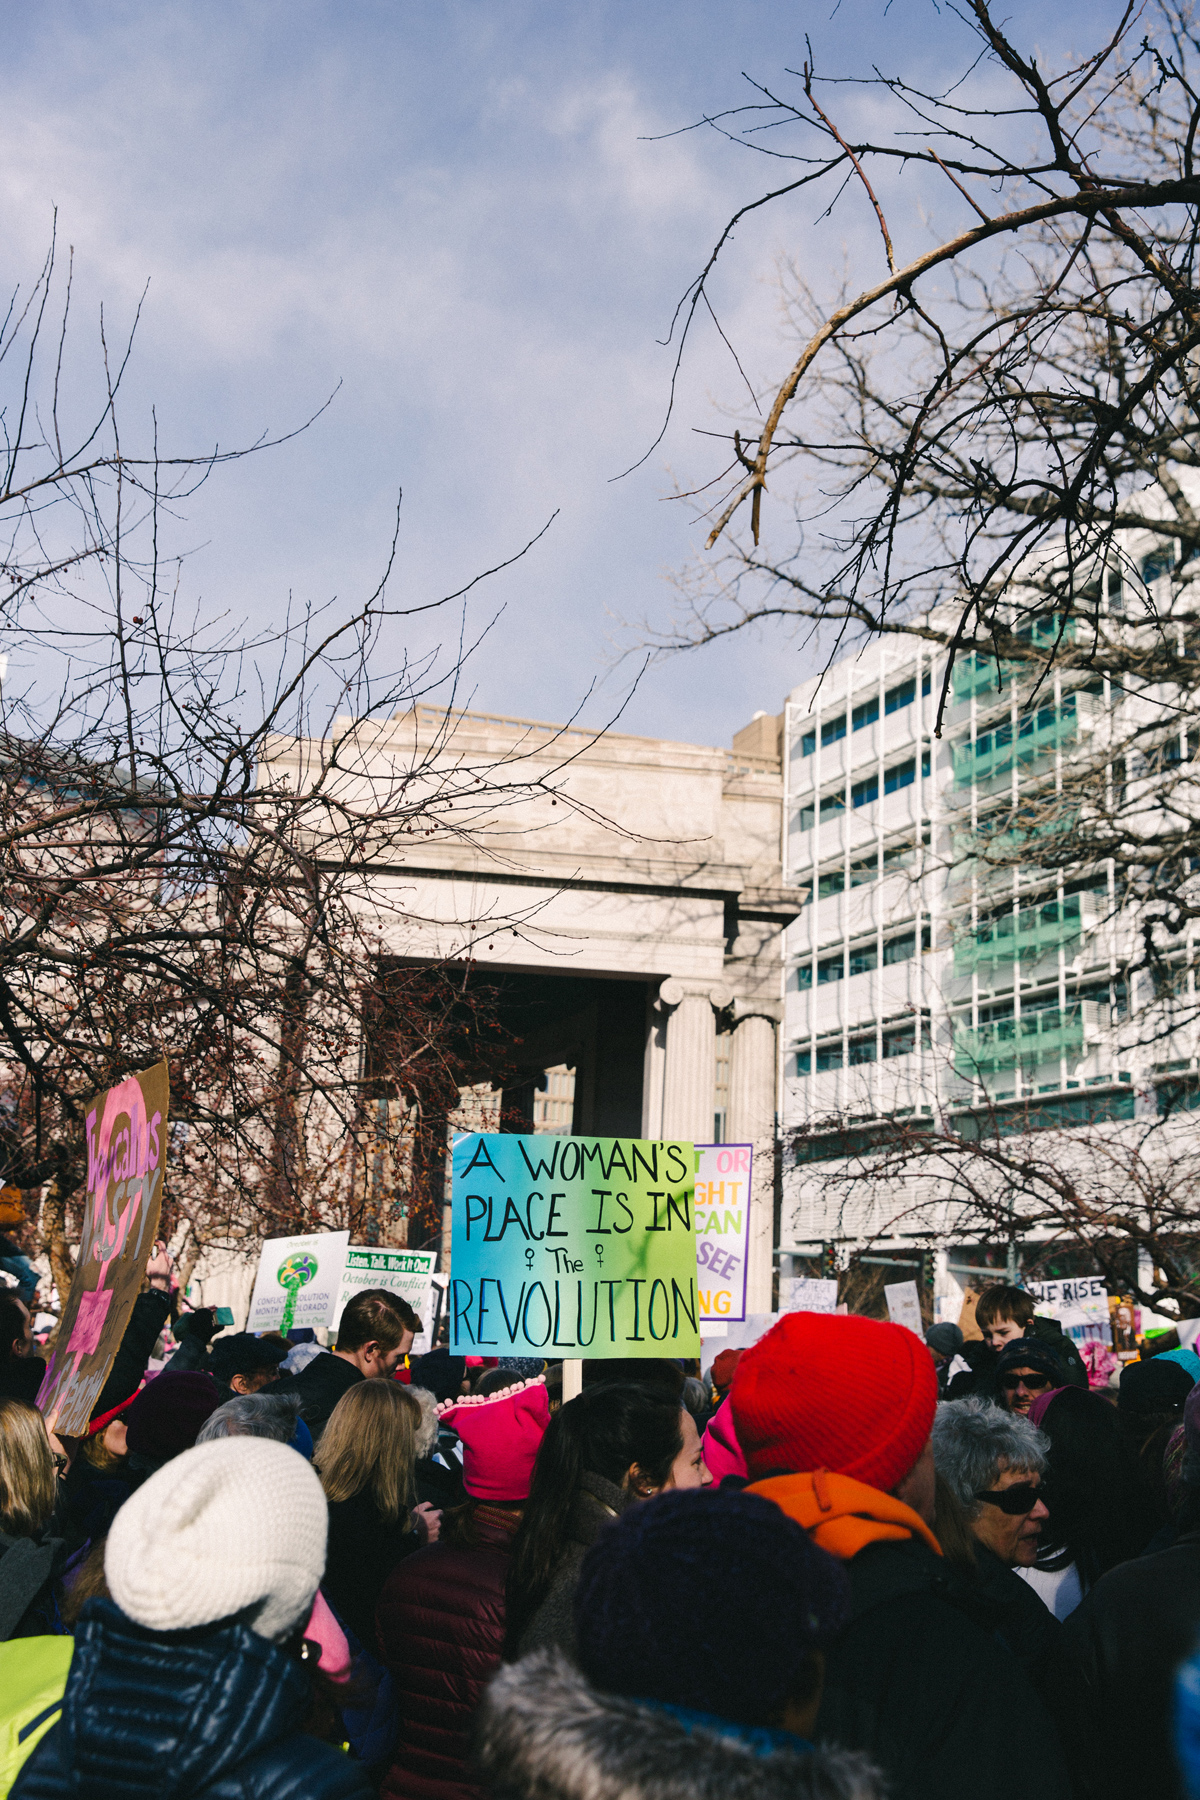 015-womens-march--denver--colorado--photo--love-trumps-hate--pussy-power--forget-me-not-media--rally.jpg